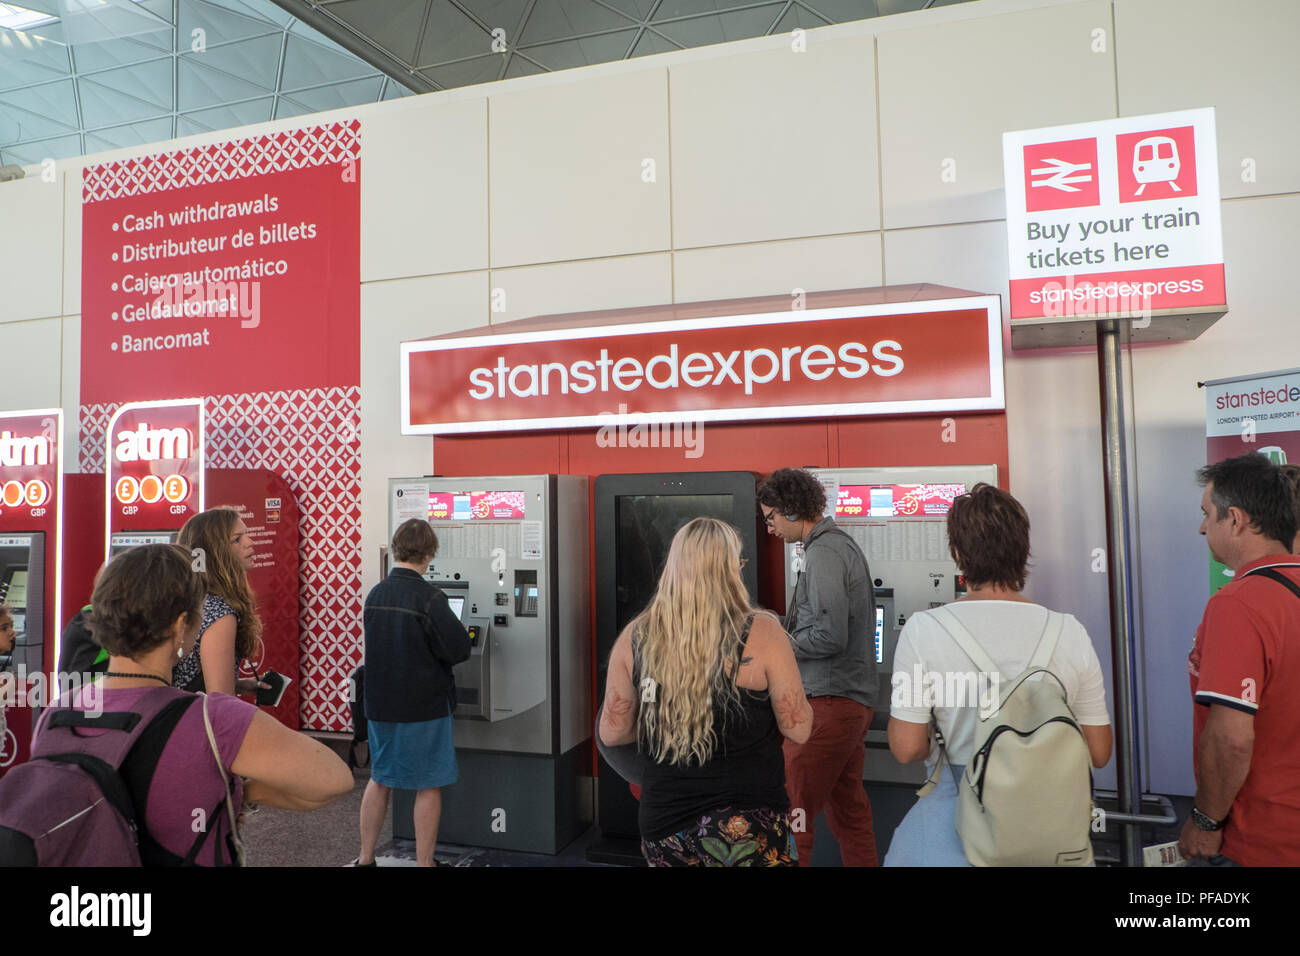 Stansted Express,train,service,ticket,vending,Stansted Airport,arrival,terminal,August,summer,London,Essex,England,Europe,European,passengers,arrival, Stock Photo